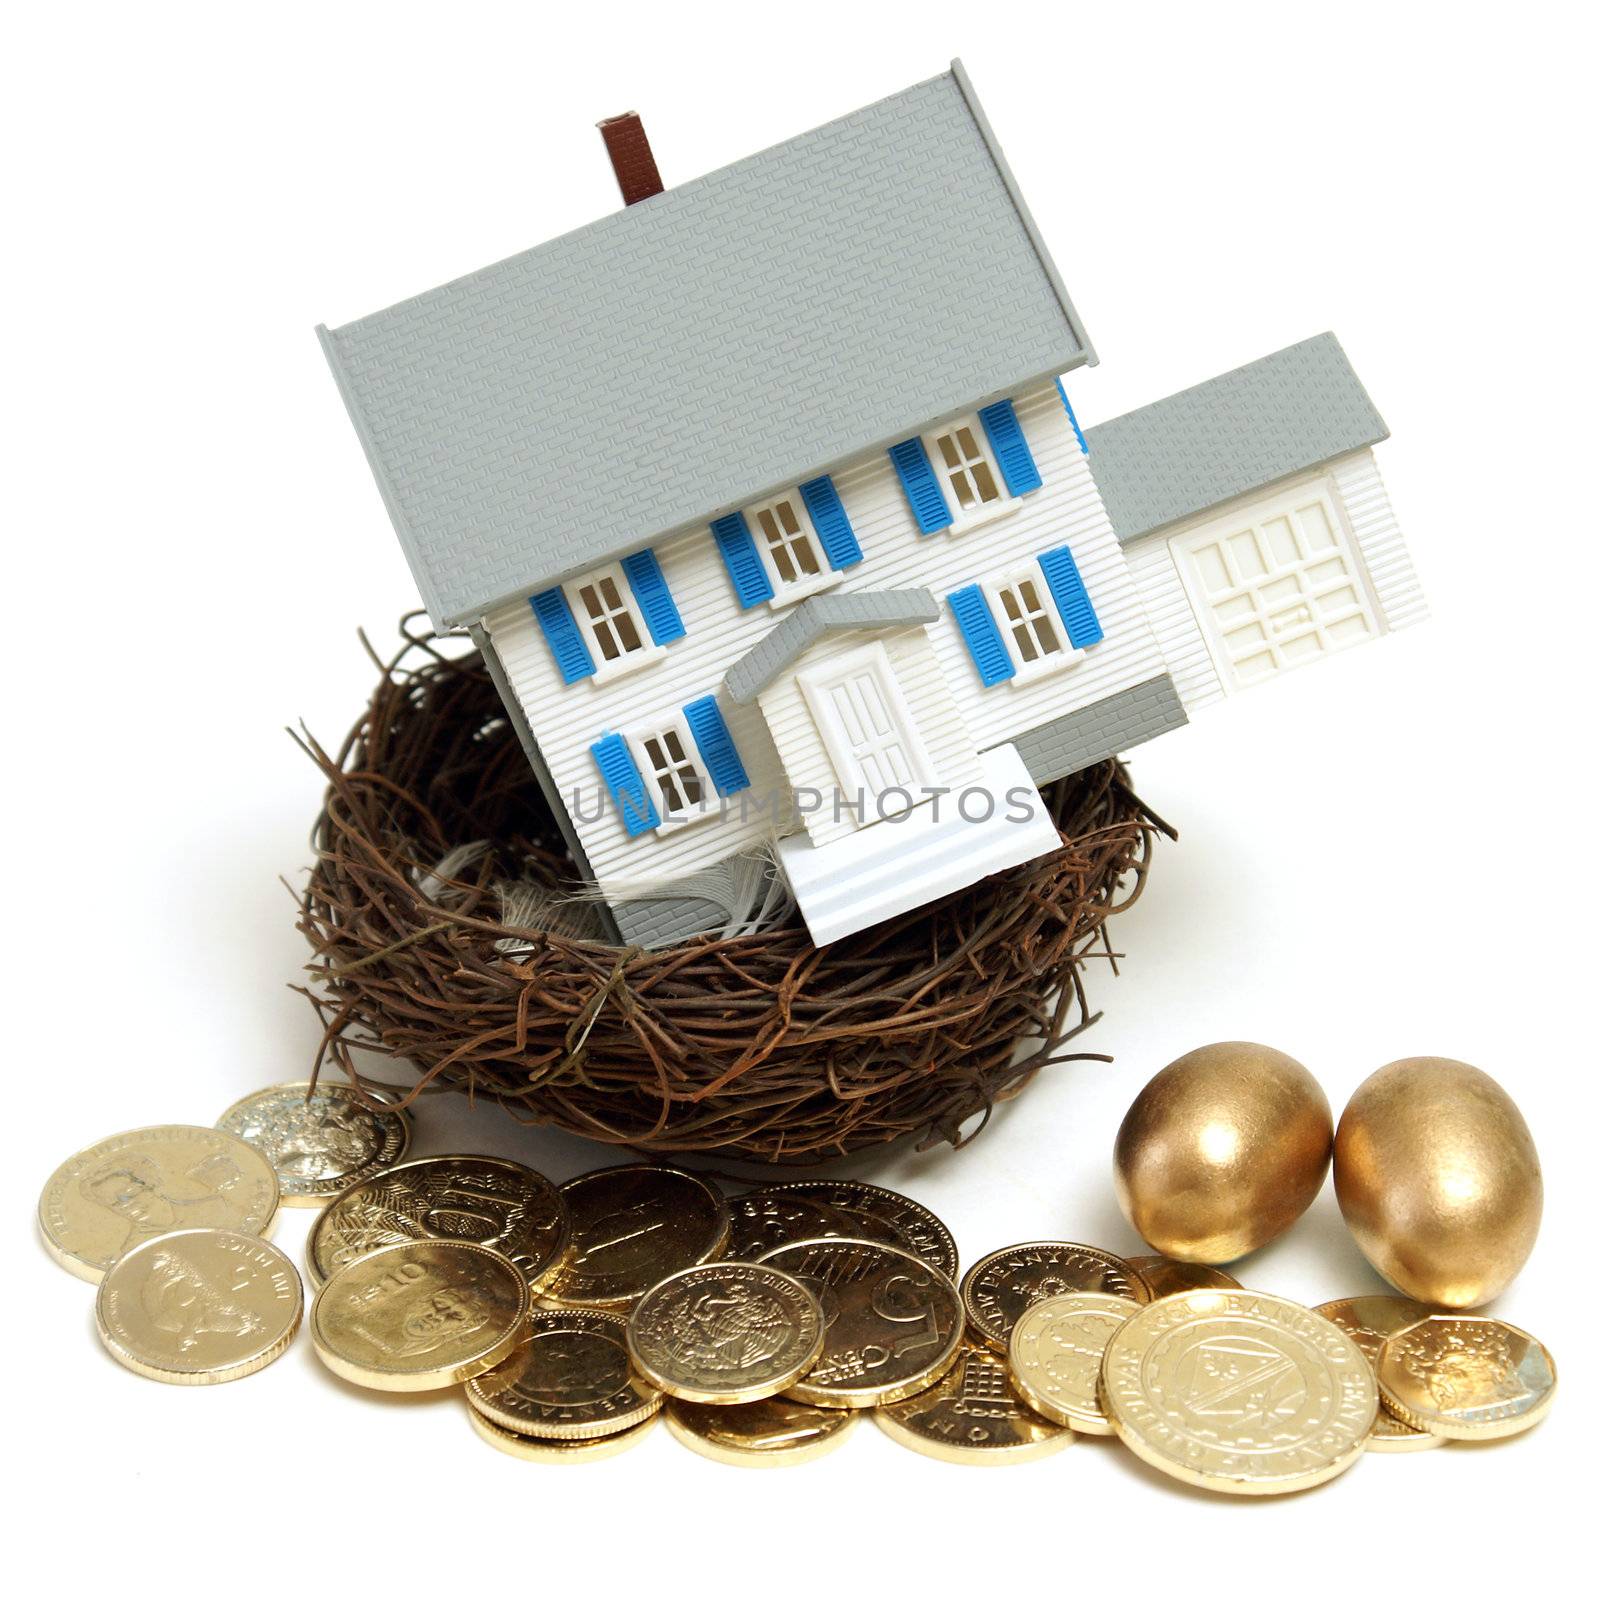 A house in a nest with golden eggs and coins for many conceptual ideas.